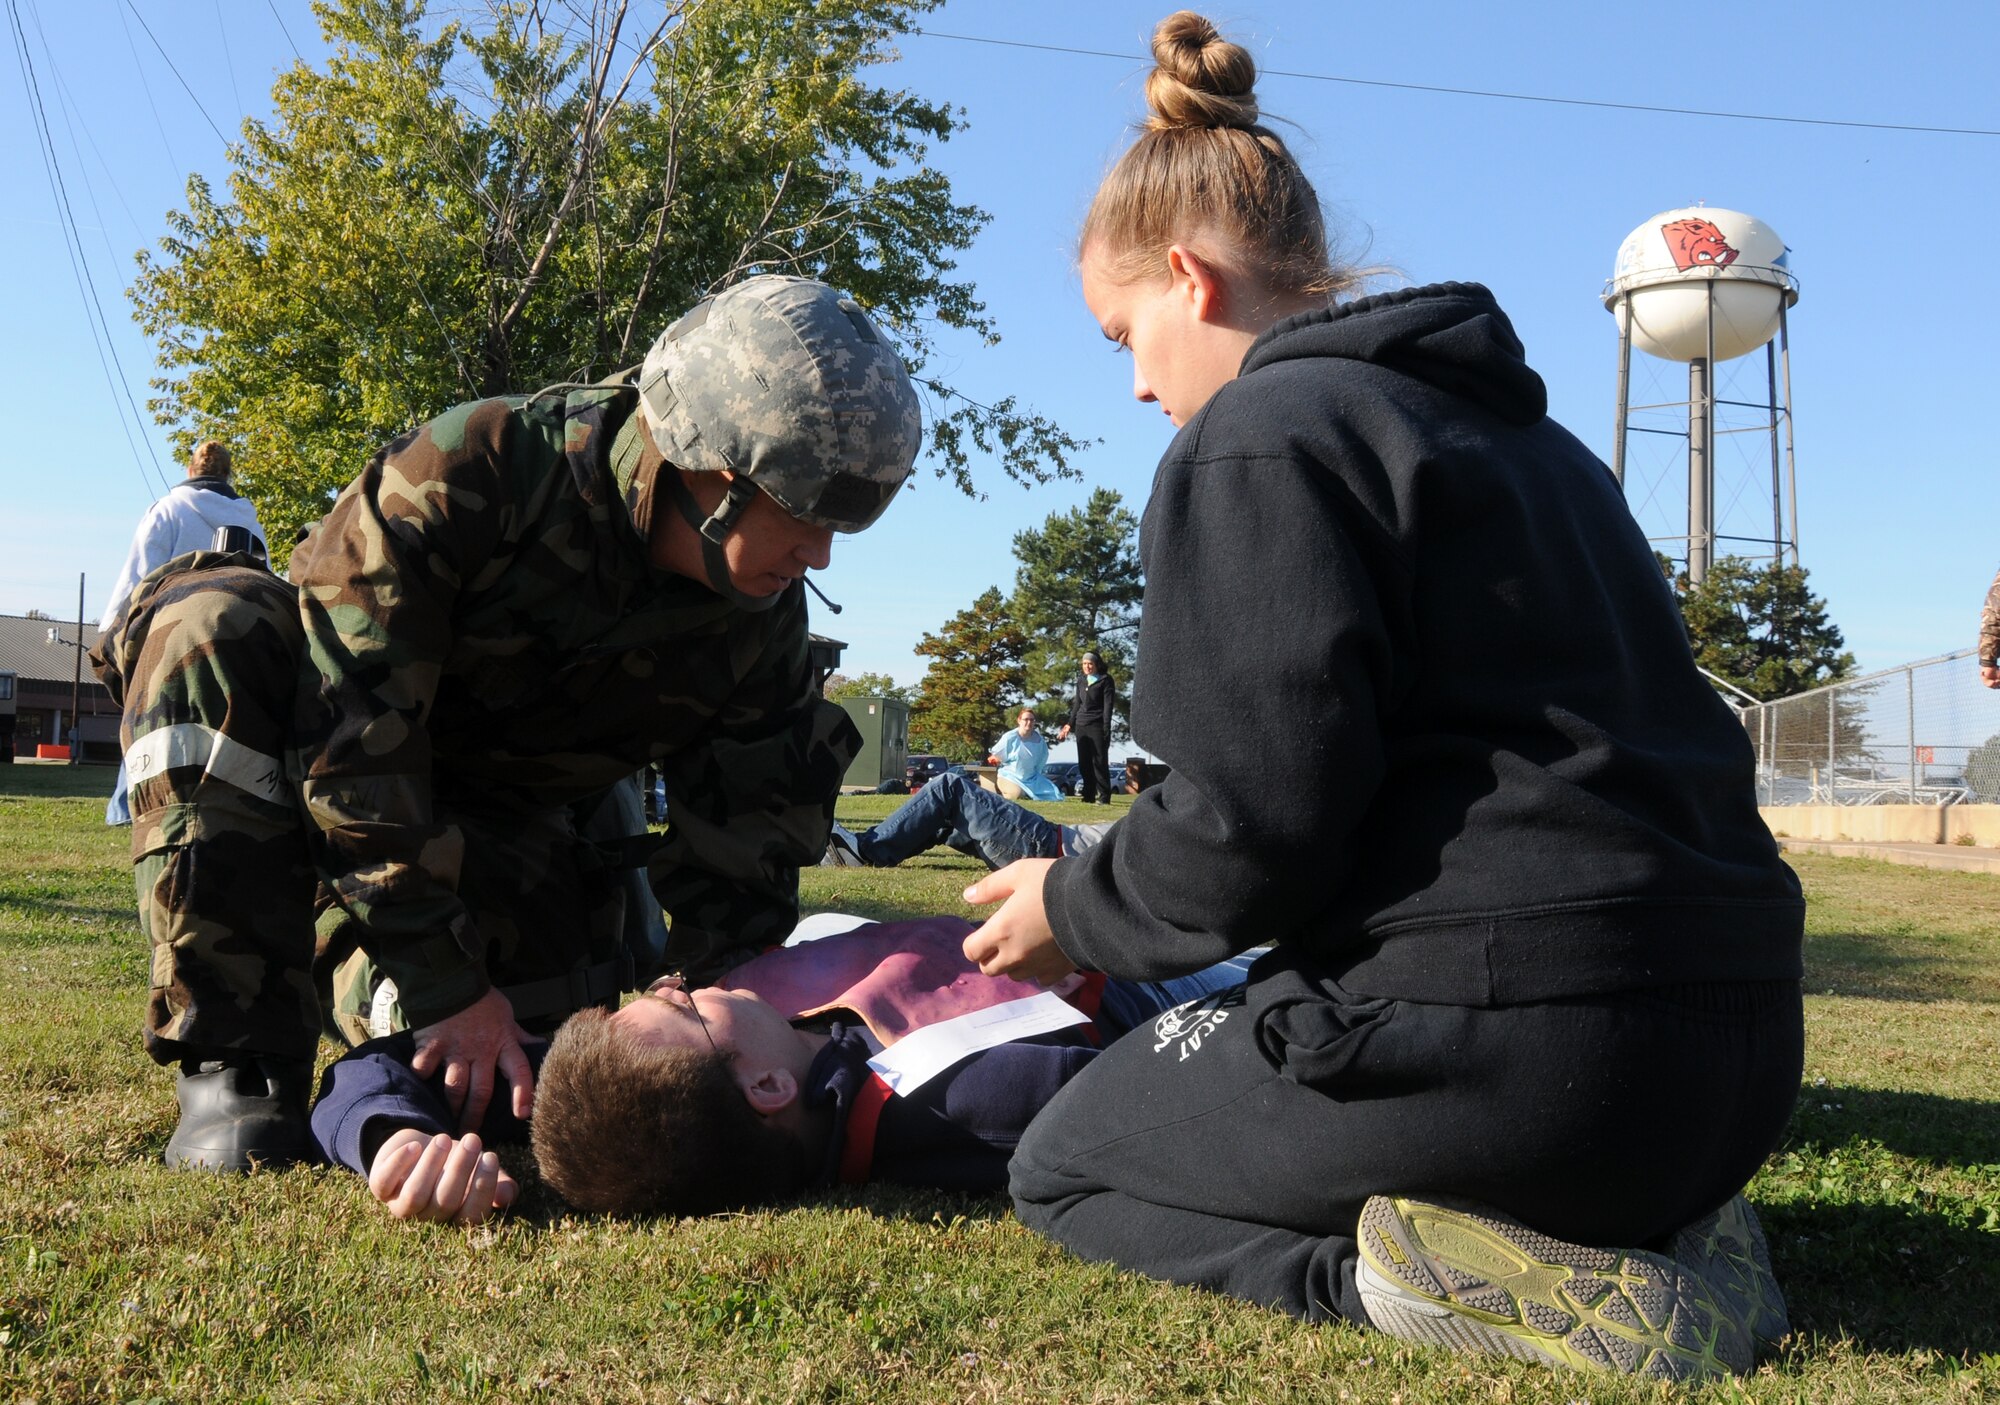 Airmen from the 188th Medical Group provide self-aid and buddy care for simulated injured wingmen during a mass casualty exercise at Ebbing Air National Guard Base, Fort Smith, Ark., Nov. 2, 2014. Student Flight Airmen volunteered to participate as casualties throughout the exercise. The purpose of the exercise was to test Airmen’s ability to triage personnel while facing possible attacks. (U.S. Air National Guard photo by Airman 1st Class Cody Martin/Released)